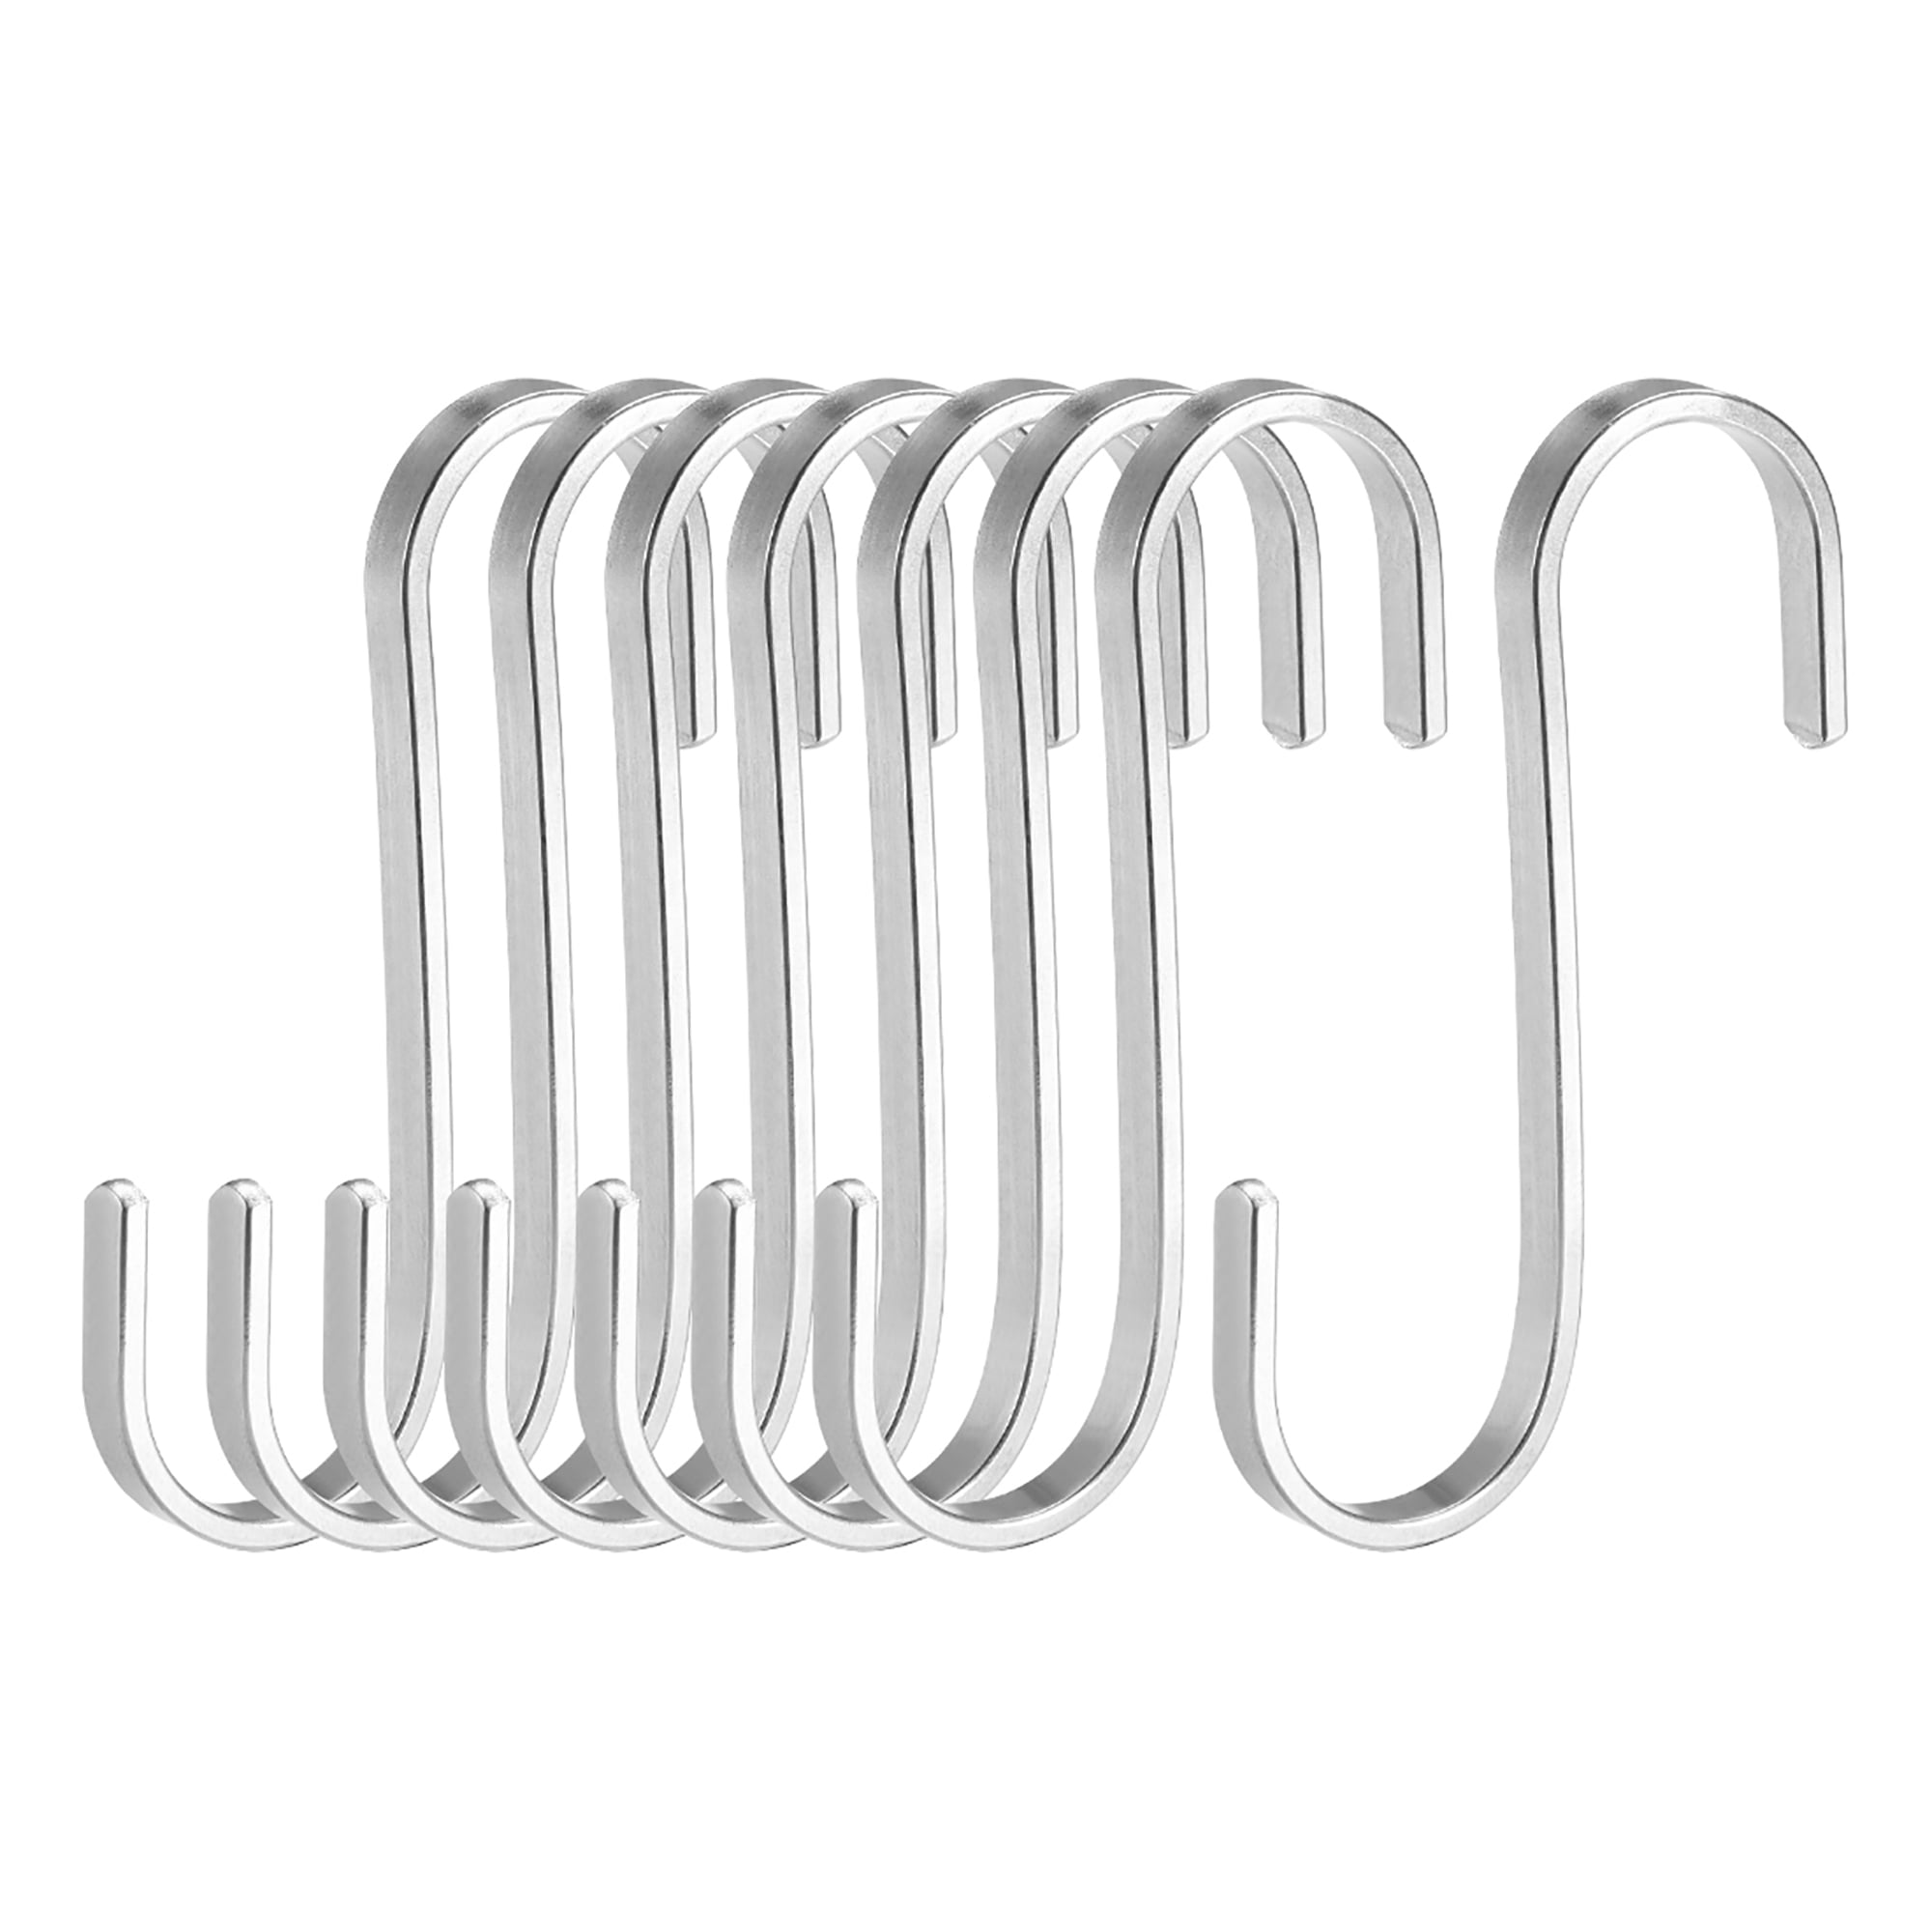 uxcell Metal S Hooks 2.4 inches S Shaped Hook Hangers for Kitchen Bathroom Bedroom Storage Room Office Outdoor Multiple Uses 25pcs 